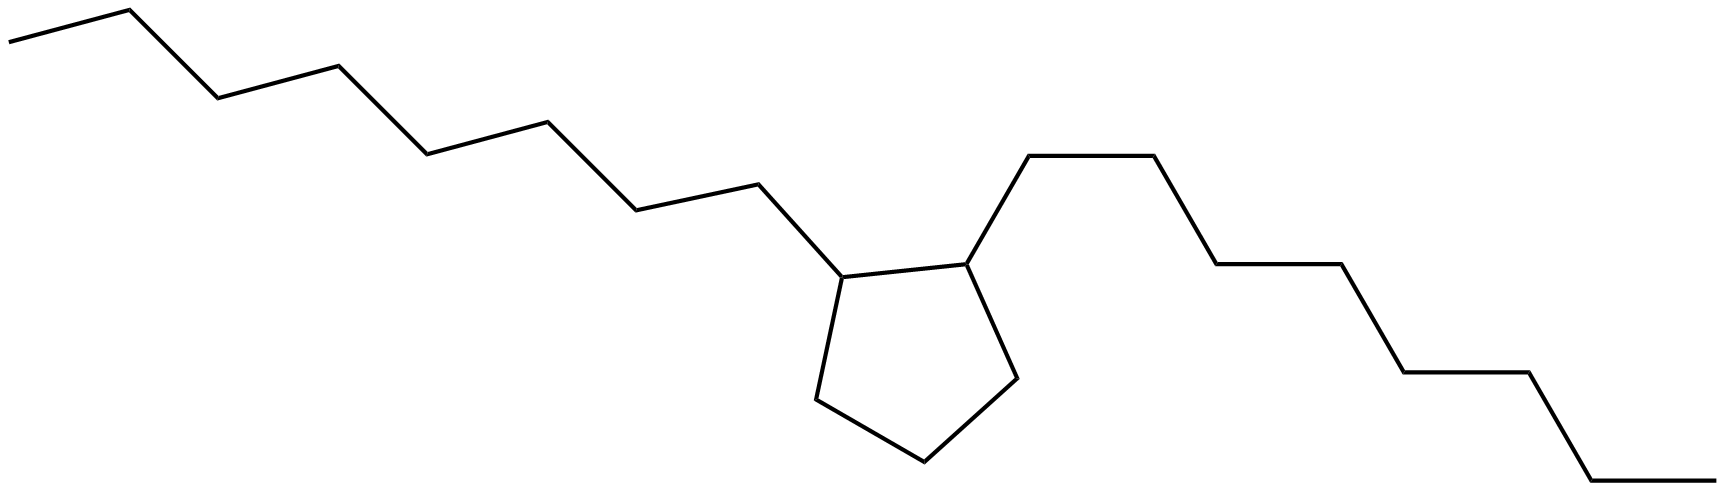 Image of 1,2-dioctylcyclopentane